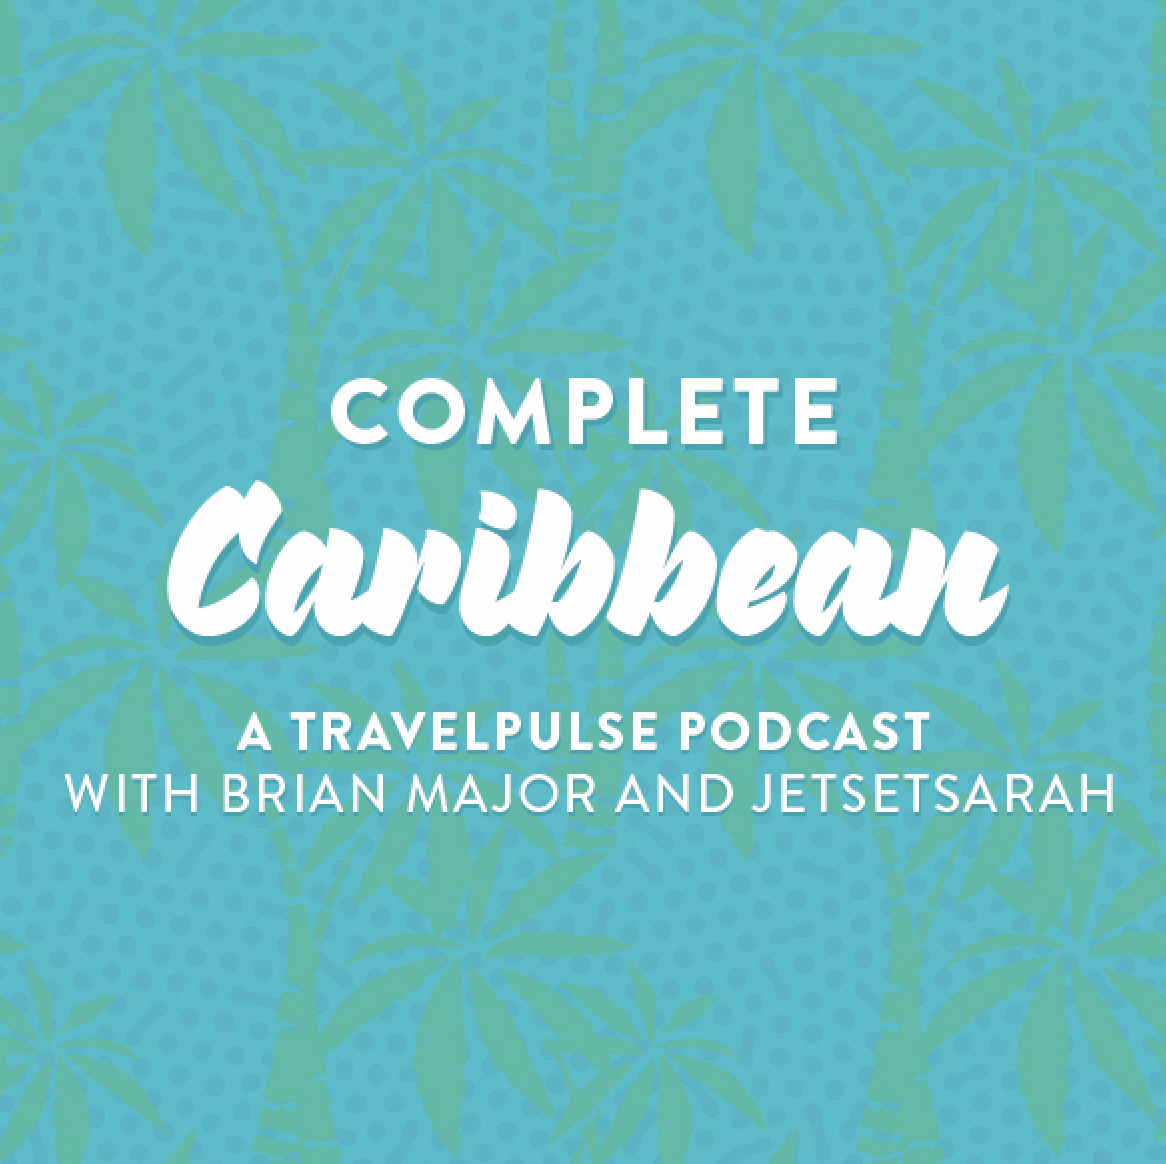 Change at the Forefront of Caribbean Travel